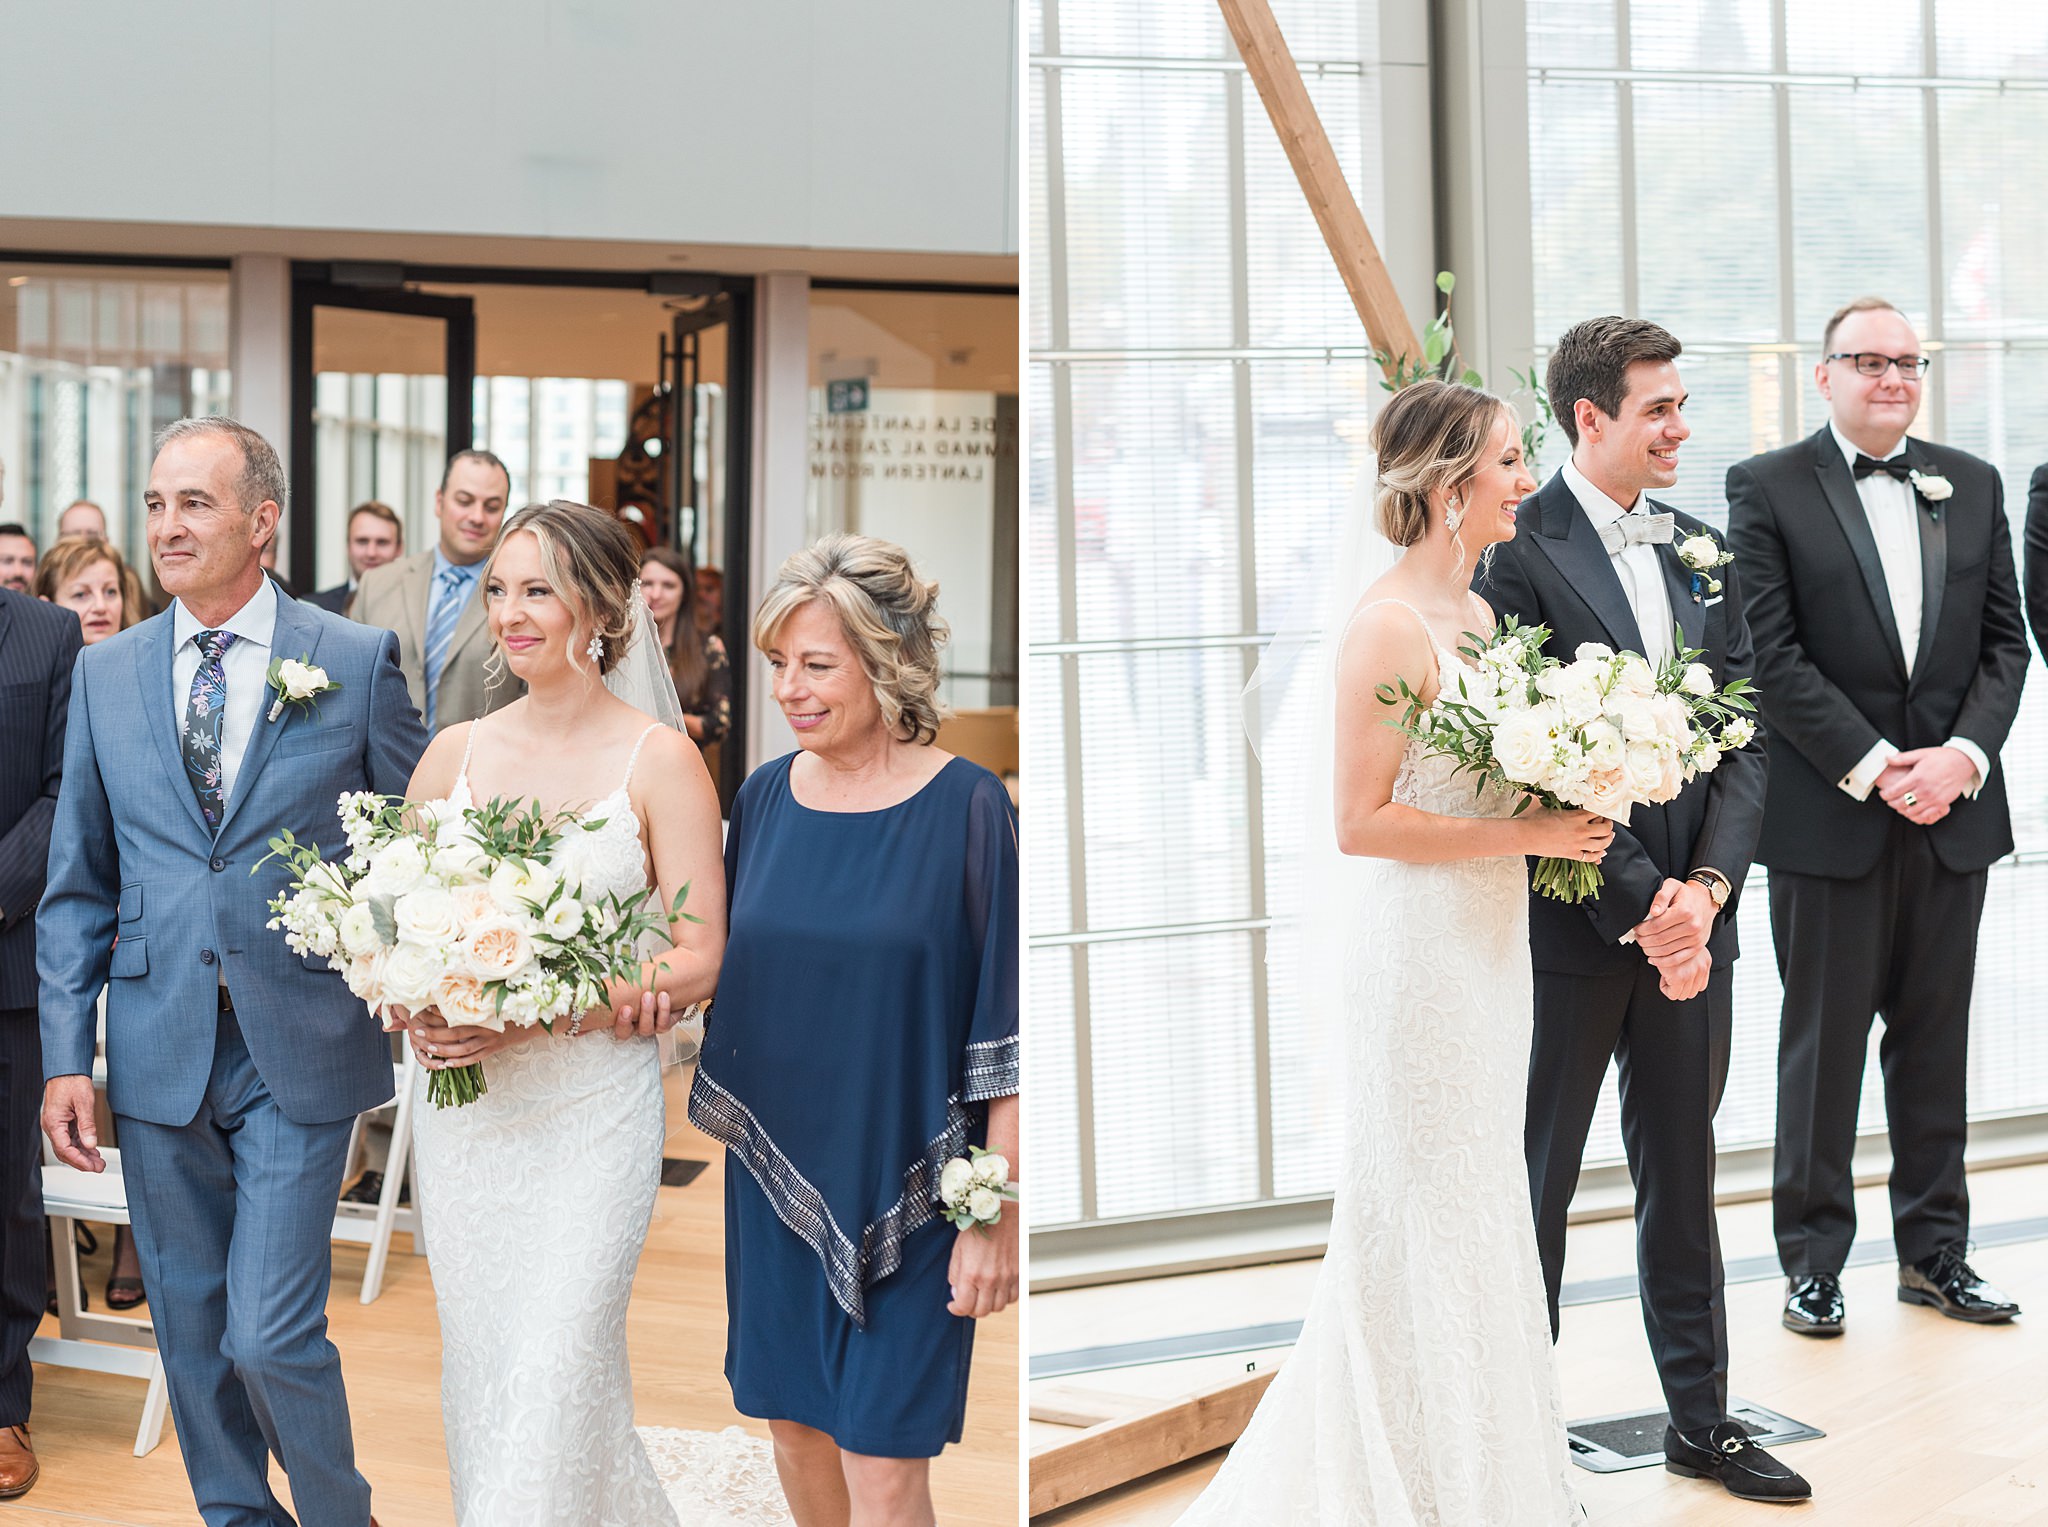 Soft Romantic Slate Blue National Arts Centre Wedding | Ottawa Wedding | Wedding photos at by the Rideau Canal downtown Ottawa Get more inspiration from this soft romantic wedding. #ottawawedding #weddingphotography #ottawaweddings